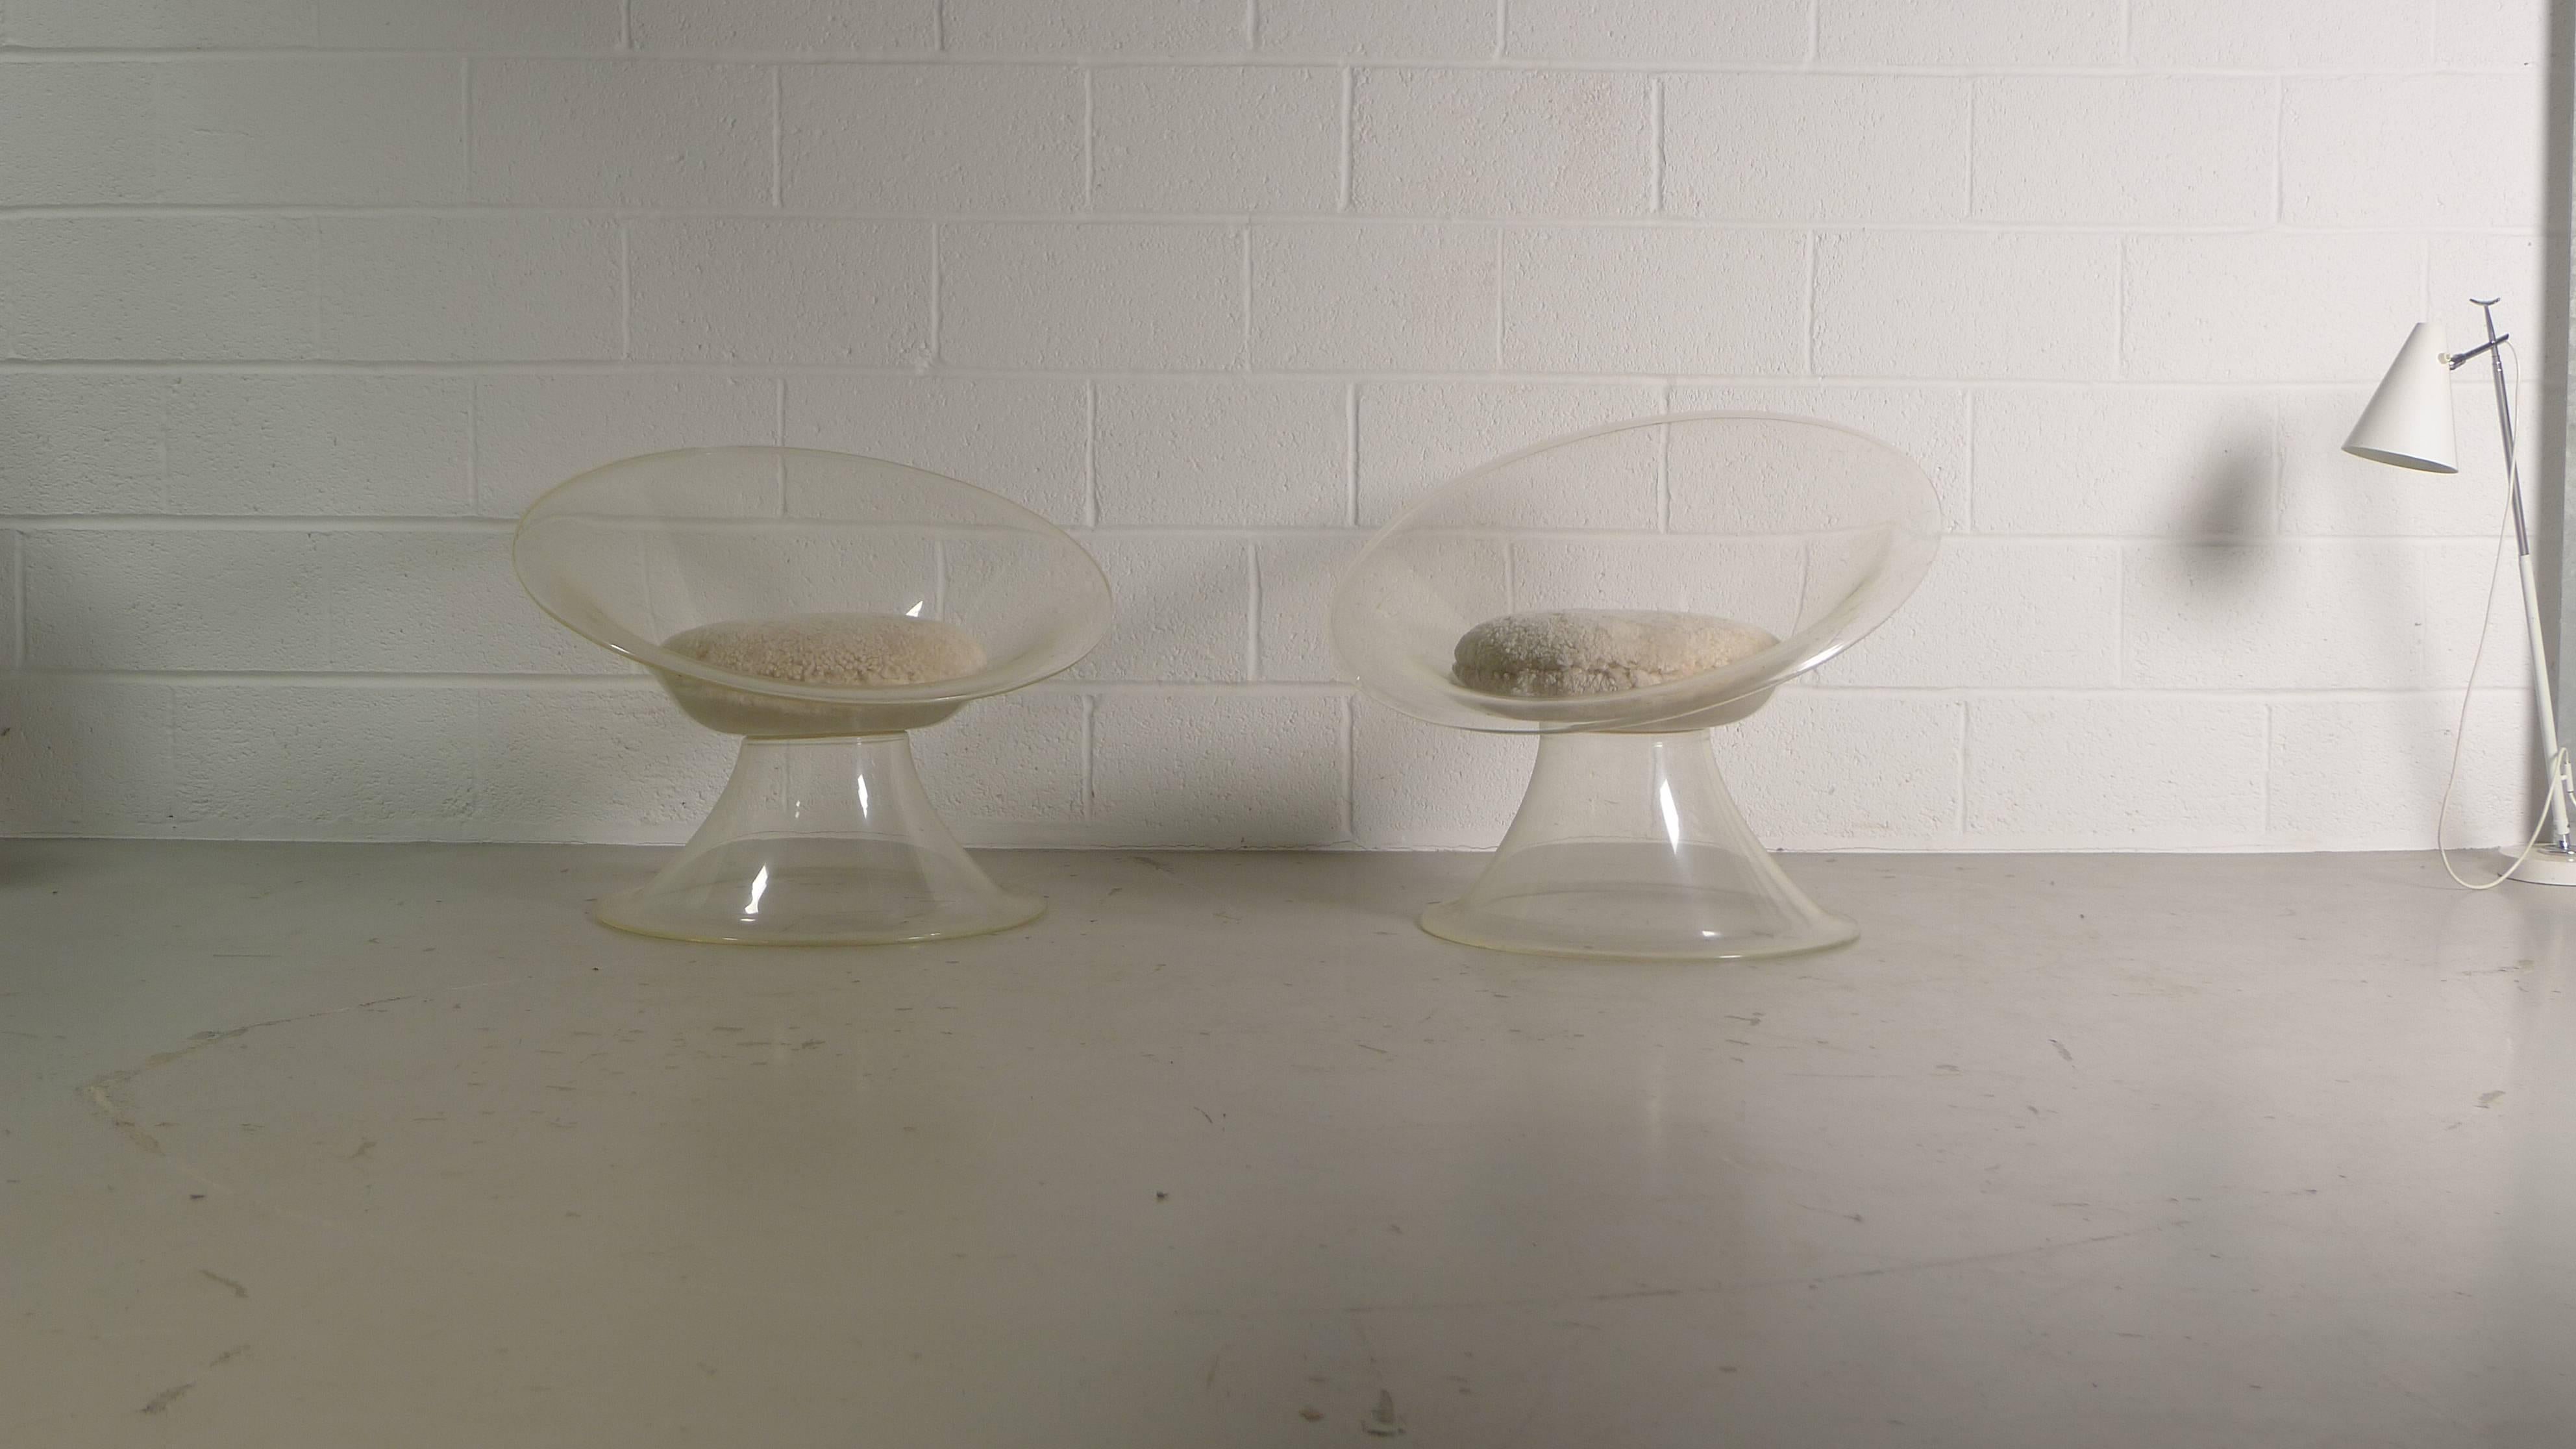 Erwine and Estelle Laverne, circa 1960, a pair of Buttercup chairs in clear Lucite with sheepskin seat cushions.

Some light age appropriate scratches to Lucite. 
Priced for the pair.